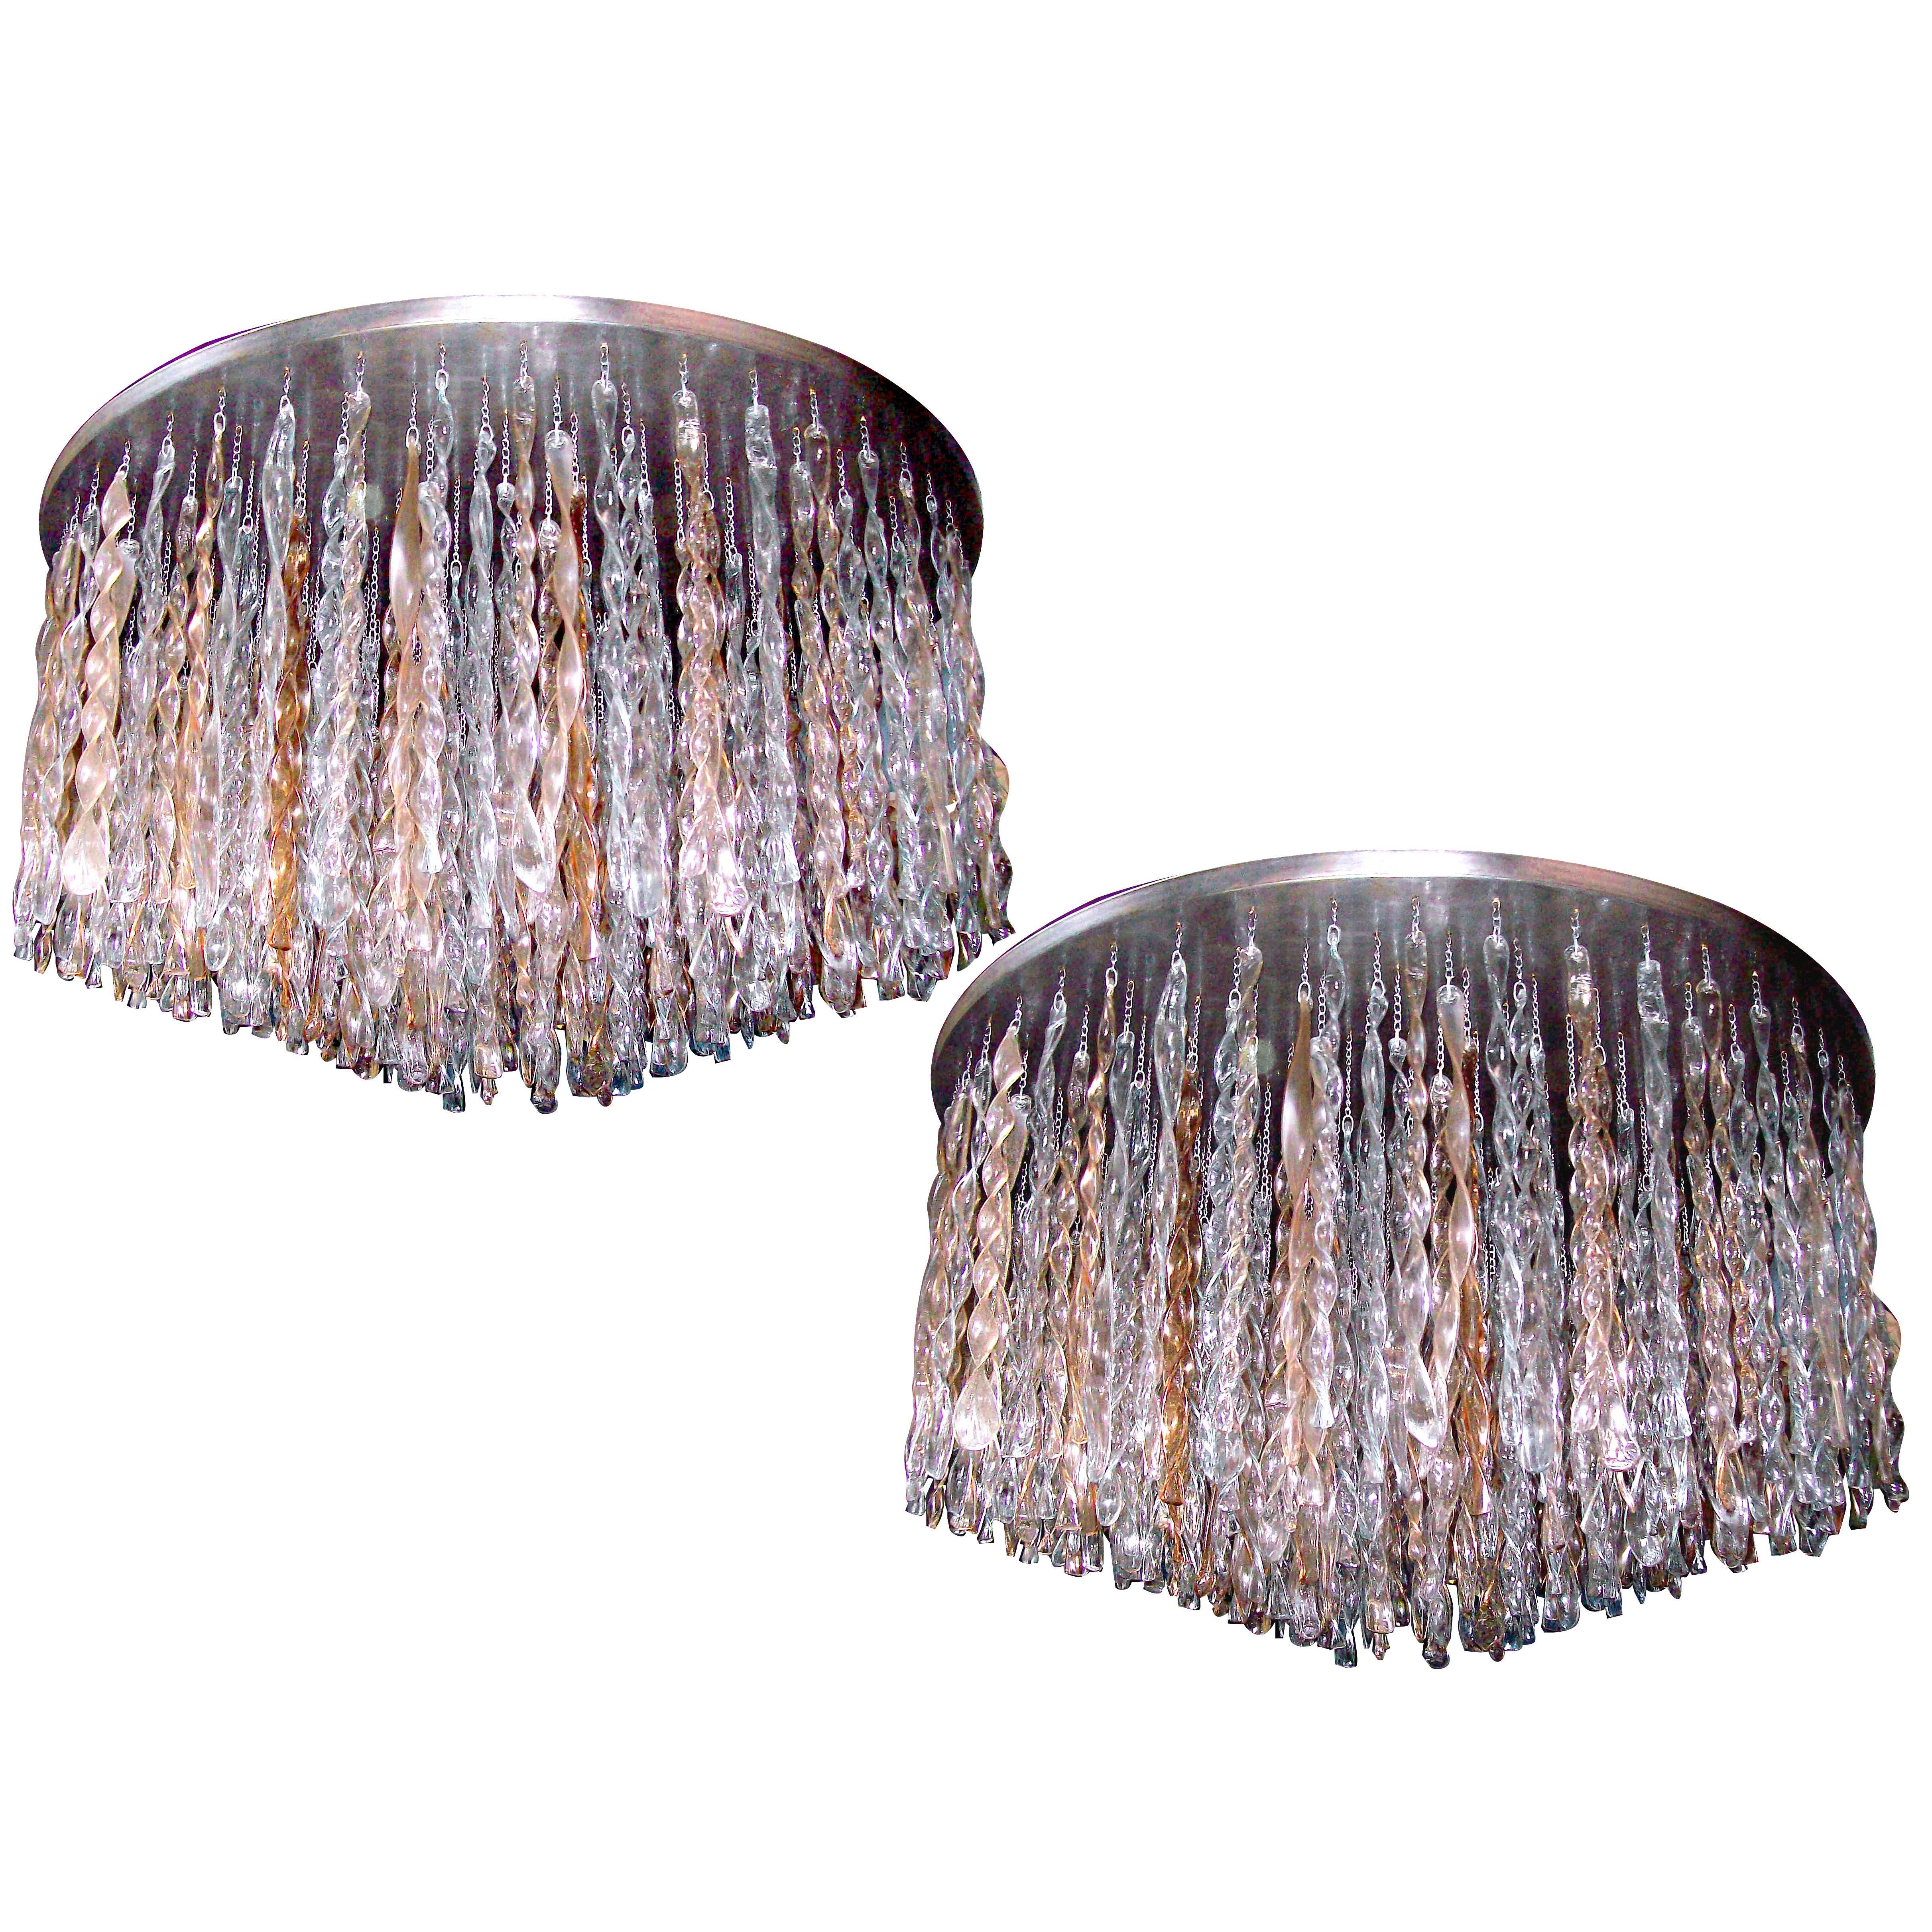 Pair of Large Moderne Light Fixture Chandeliers, Sold Individually